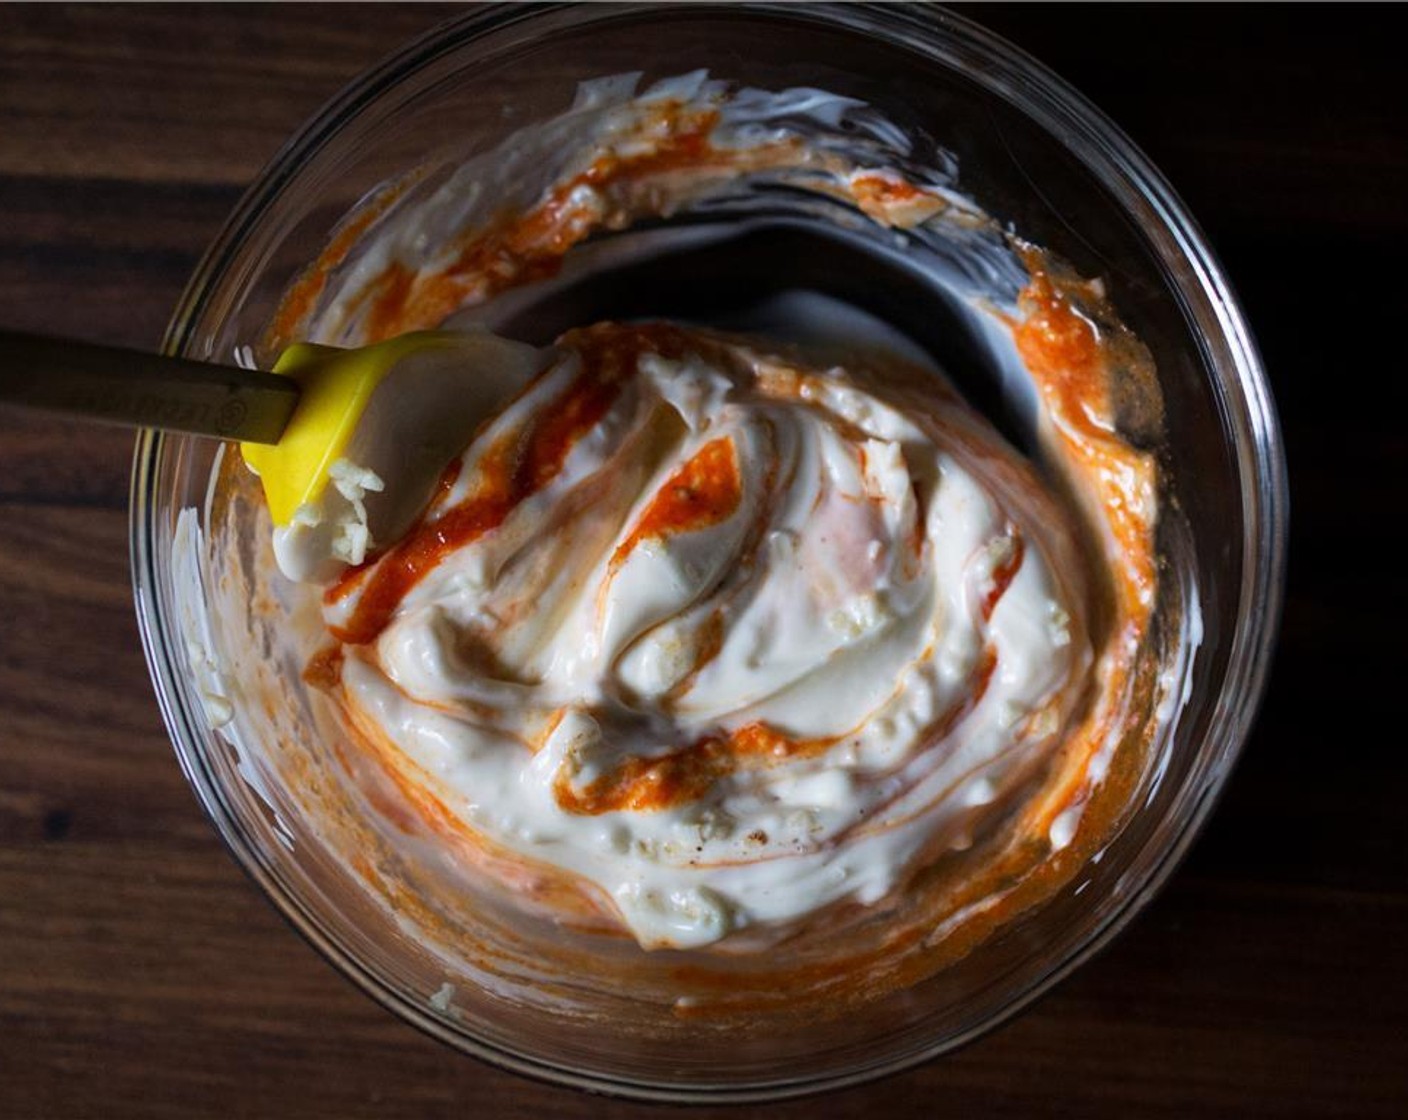 step 1 To make the sriracha sauce aioli; in a small bowl add the Mayonnaise (1/2 cup), Garlic (2 cloves), Kosher Salt (1 Tbsp), Cayenne Pepper (1 pinch), and Sriracha (1 tsp) sauce. Stir well to combine. Refrigerate until serving.